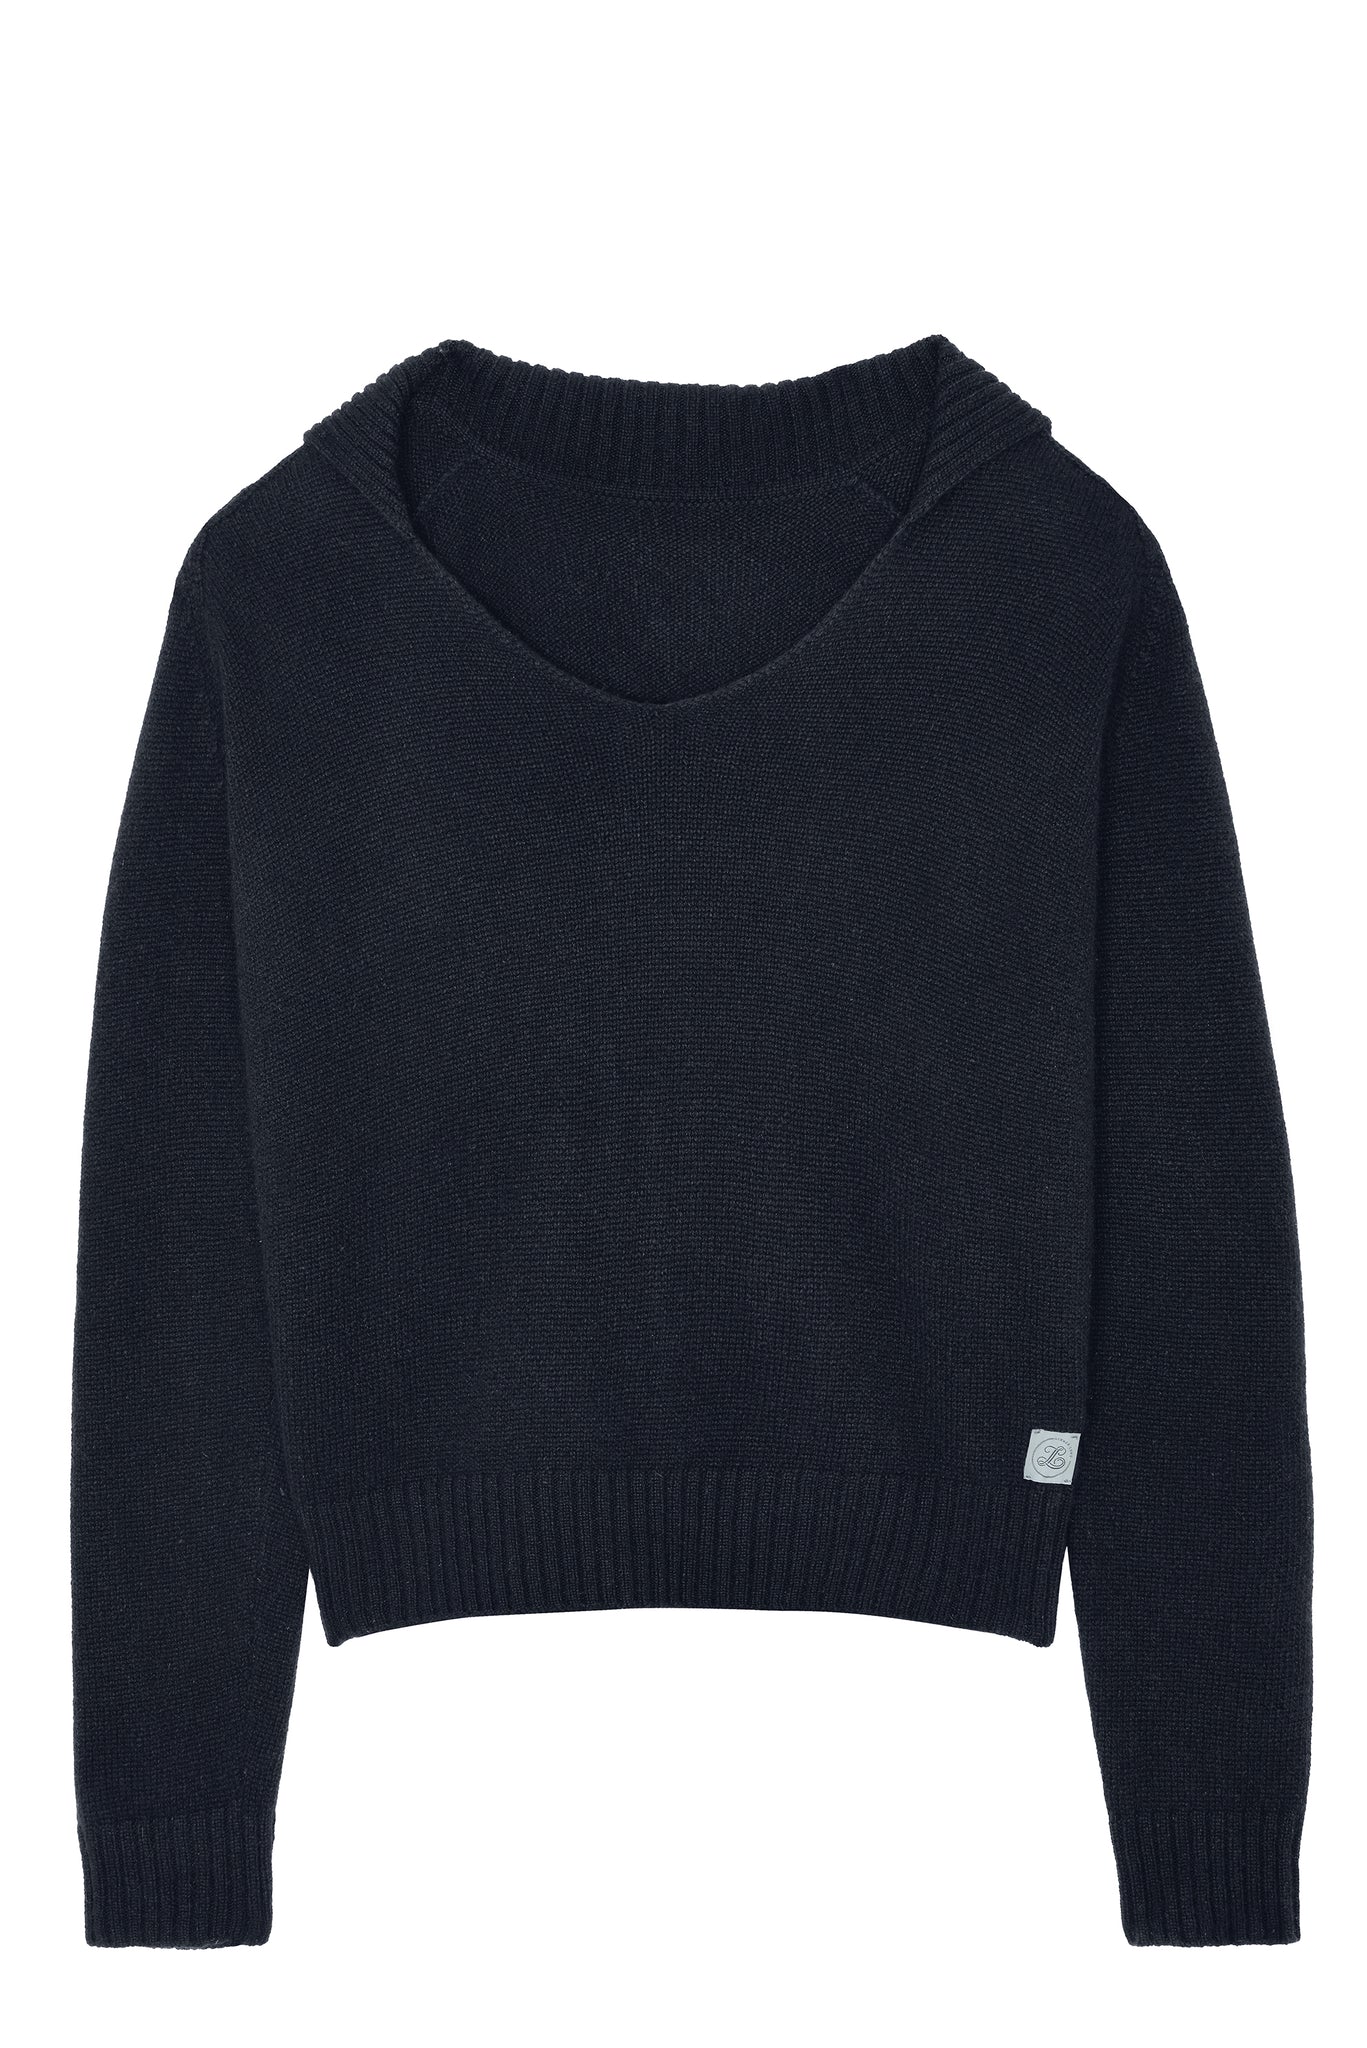 Dark navy unisex cashmere sweater featuring a v-neckline, ribbed collar, loose fitting.